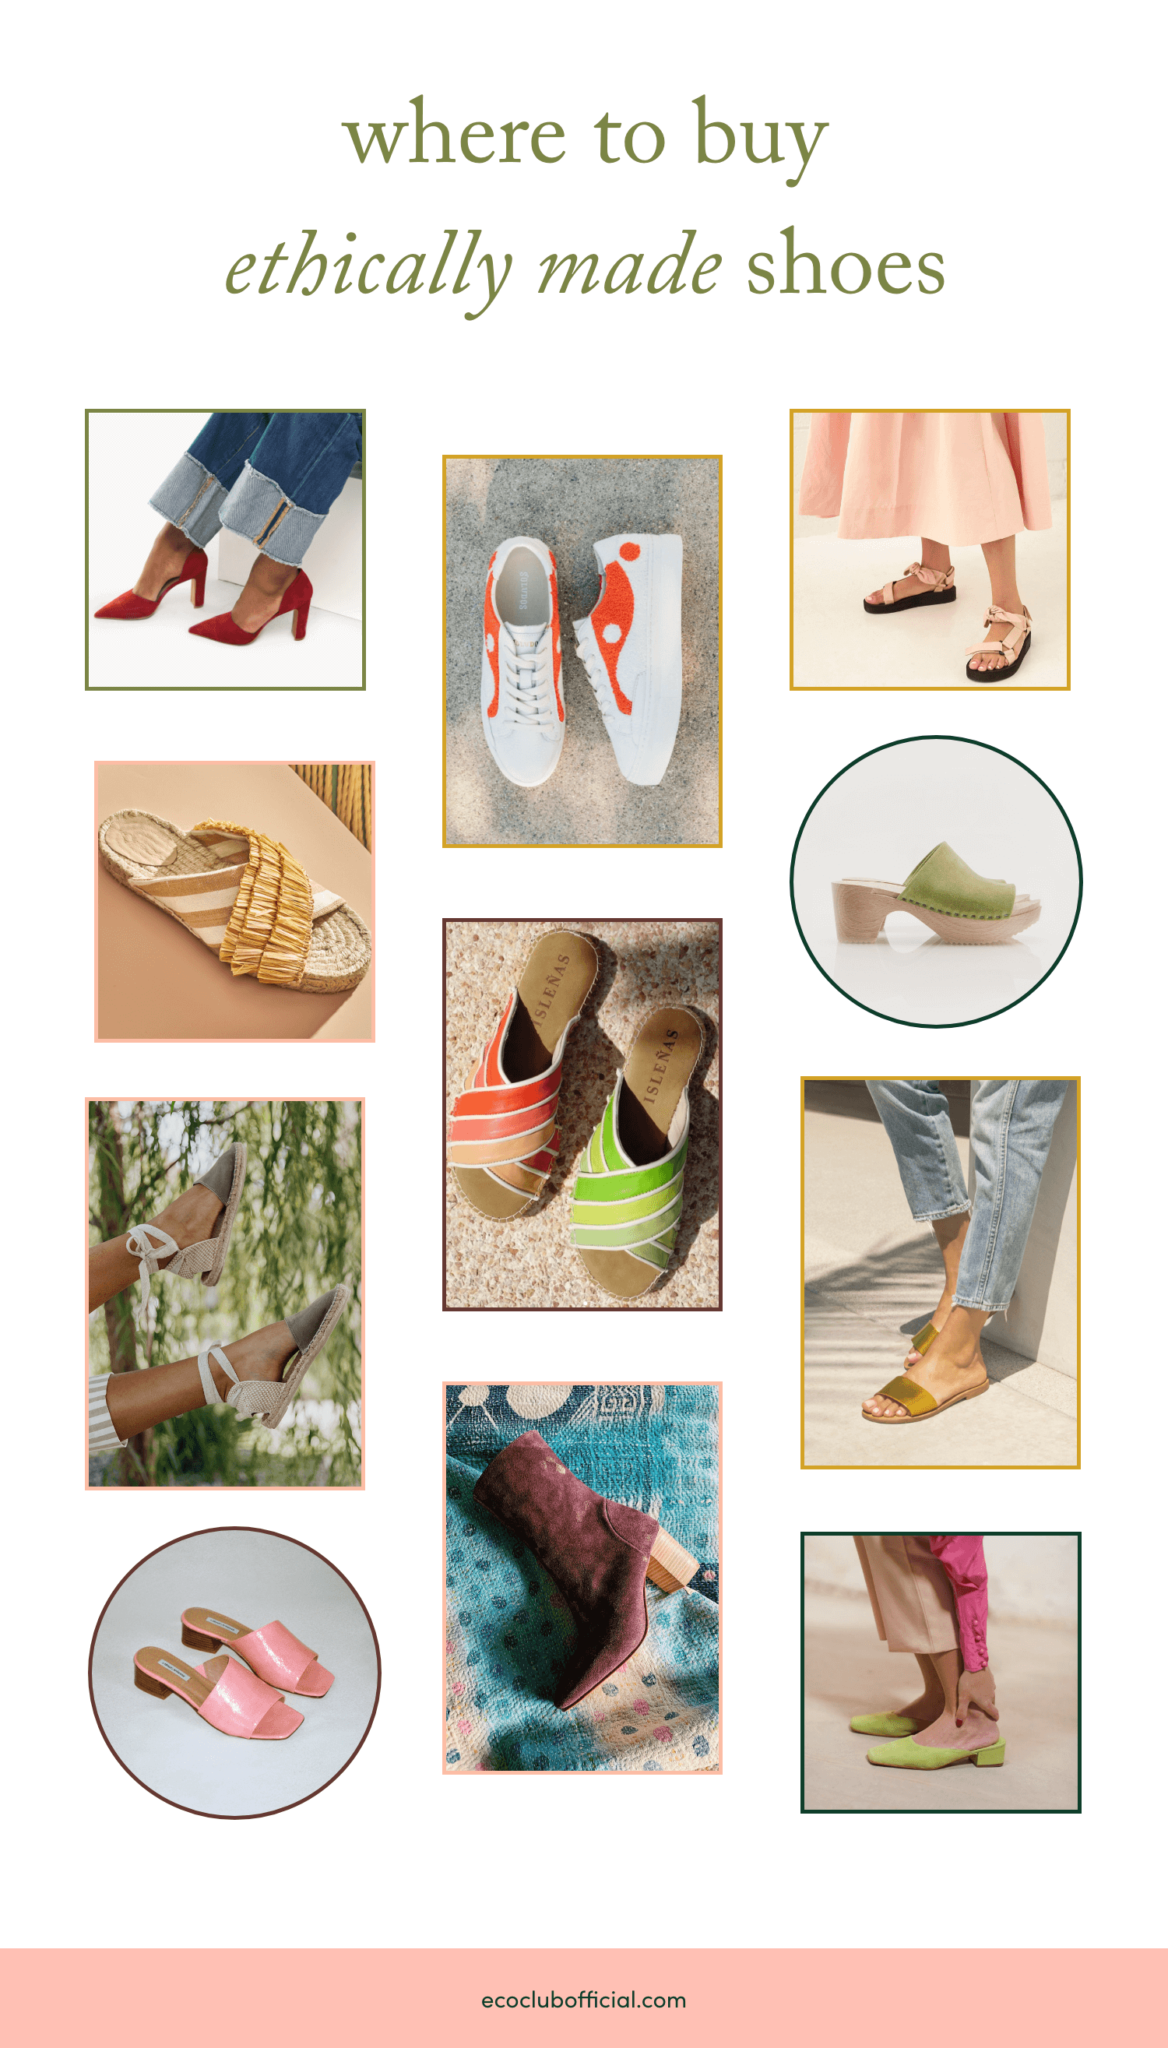 Where To Buy Ethically Made Shoes Under $300 - Ethical Shoes